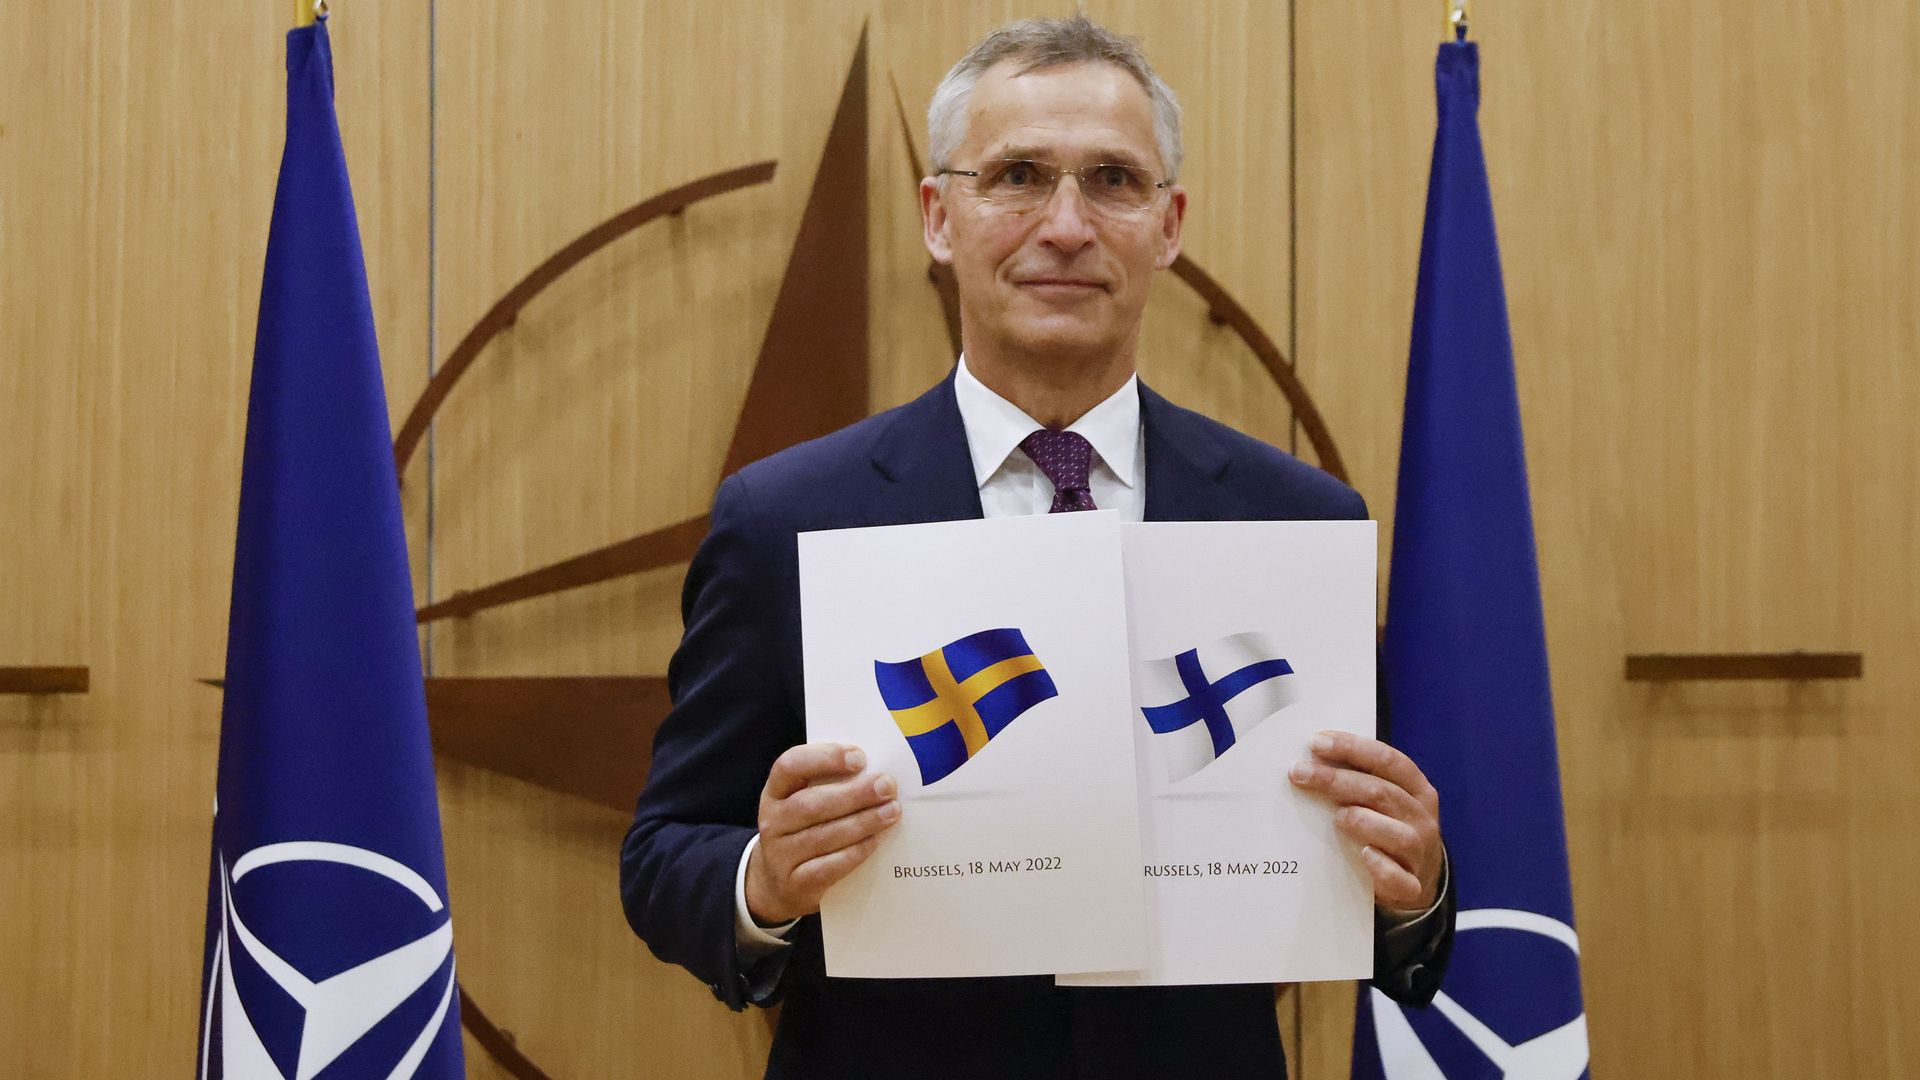 NATO Secretary-General Jens Stoltenberg displays documents from Sweden and Finland in Brussels on May 18.